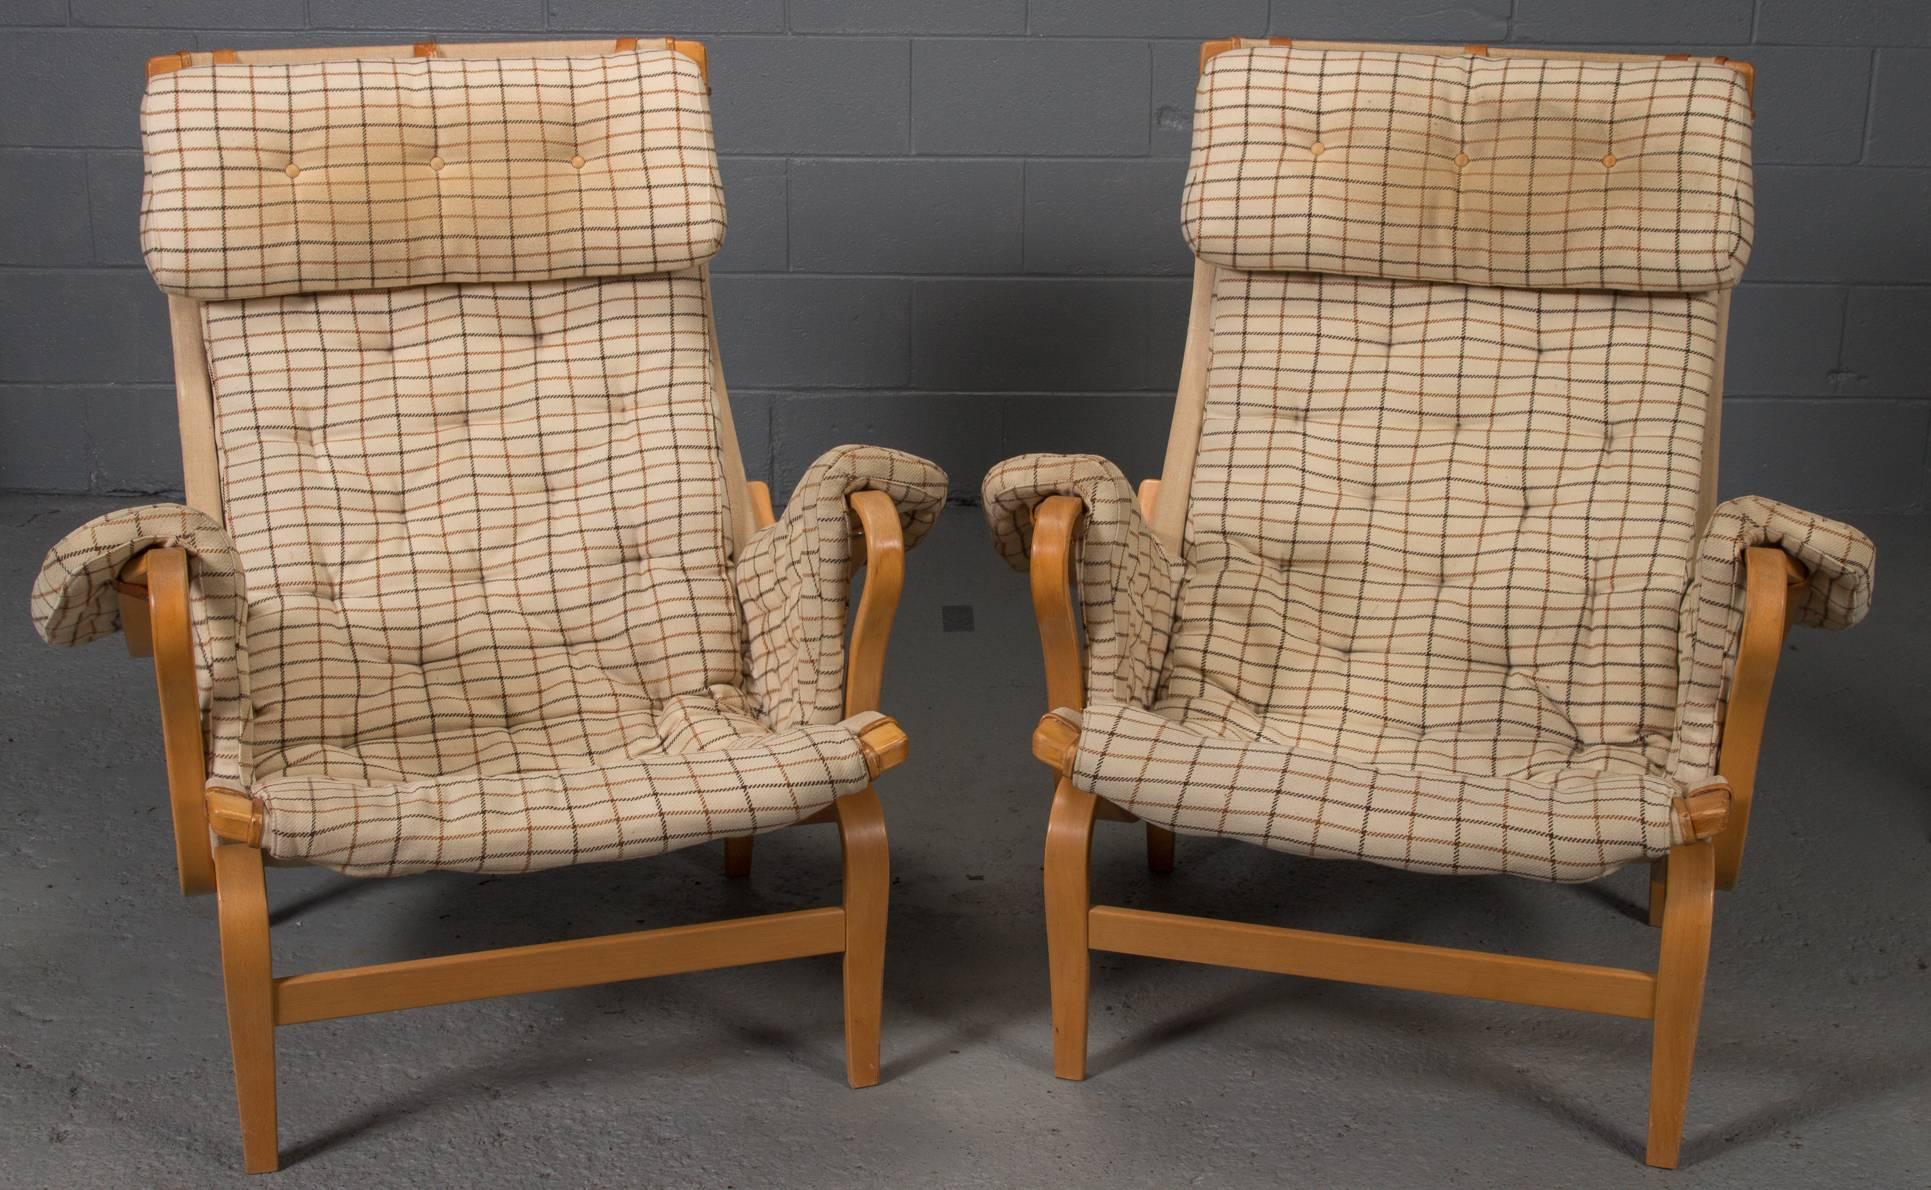 This Pernilla lounge chair in fabric and beech was designed by Bruno Mathsson for DUX in 1969. Bruno Mathsson designed the first version of this armchair in 1944. This is an improved version designed by Bruno Mathsson for DUX in 1969. The name